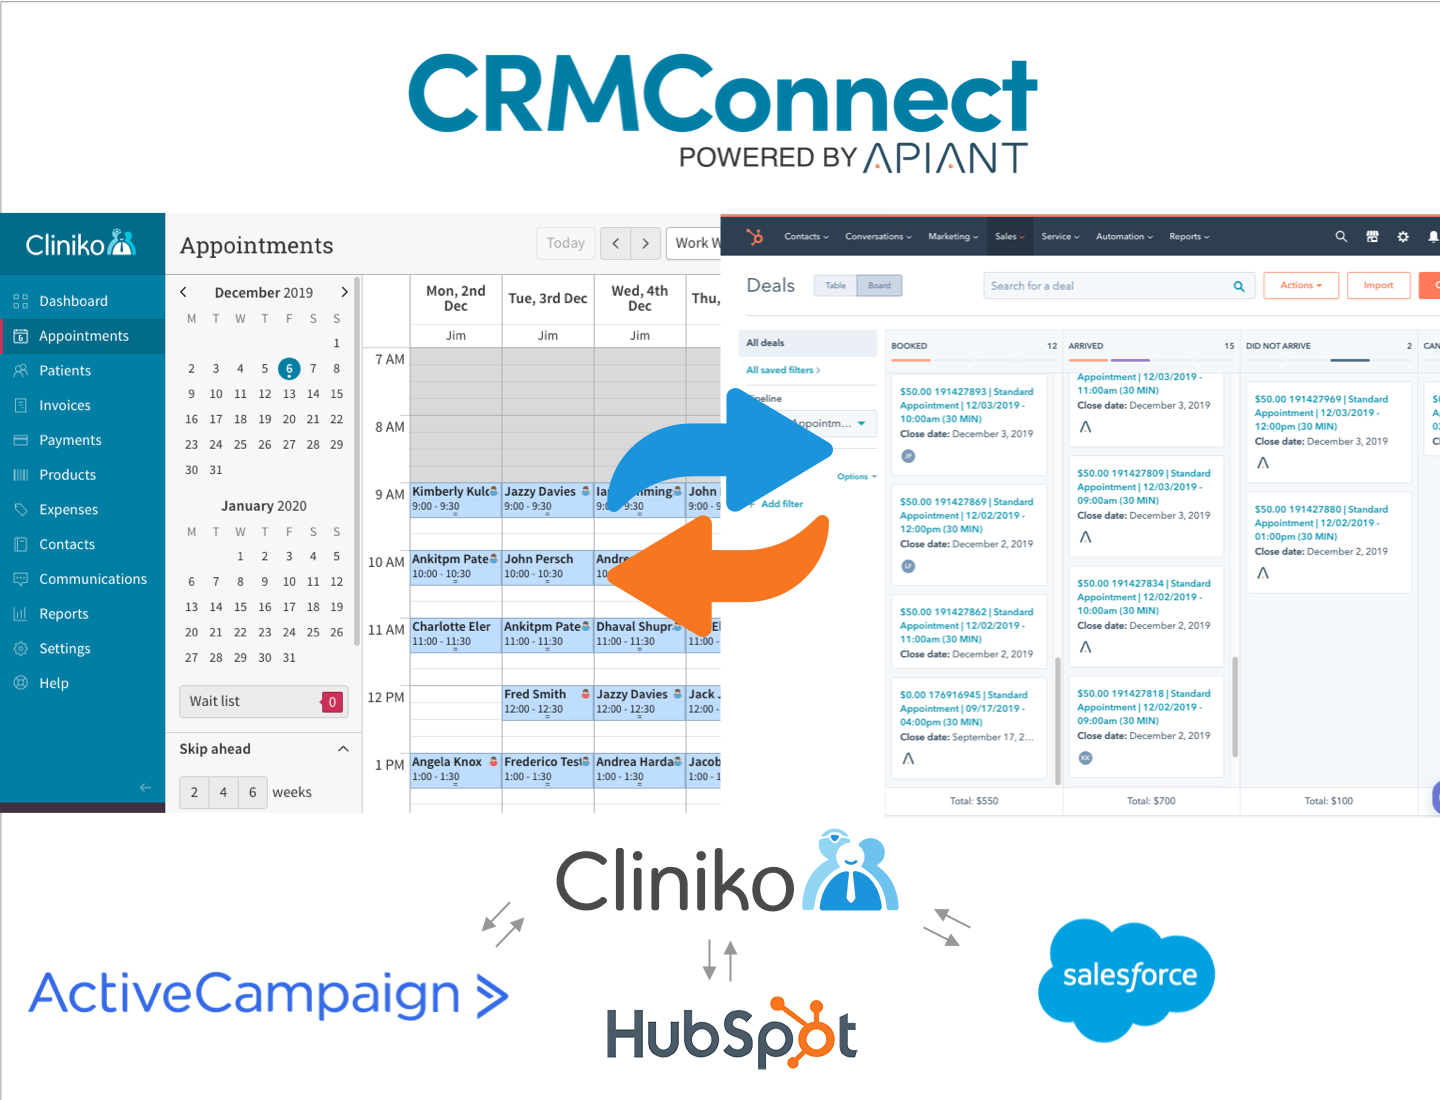 Syncing between hubspot and Cliniko using Apiant